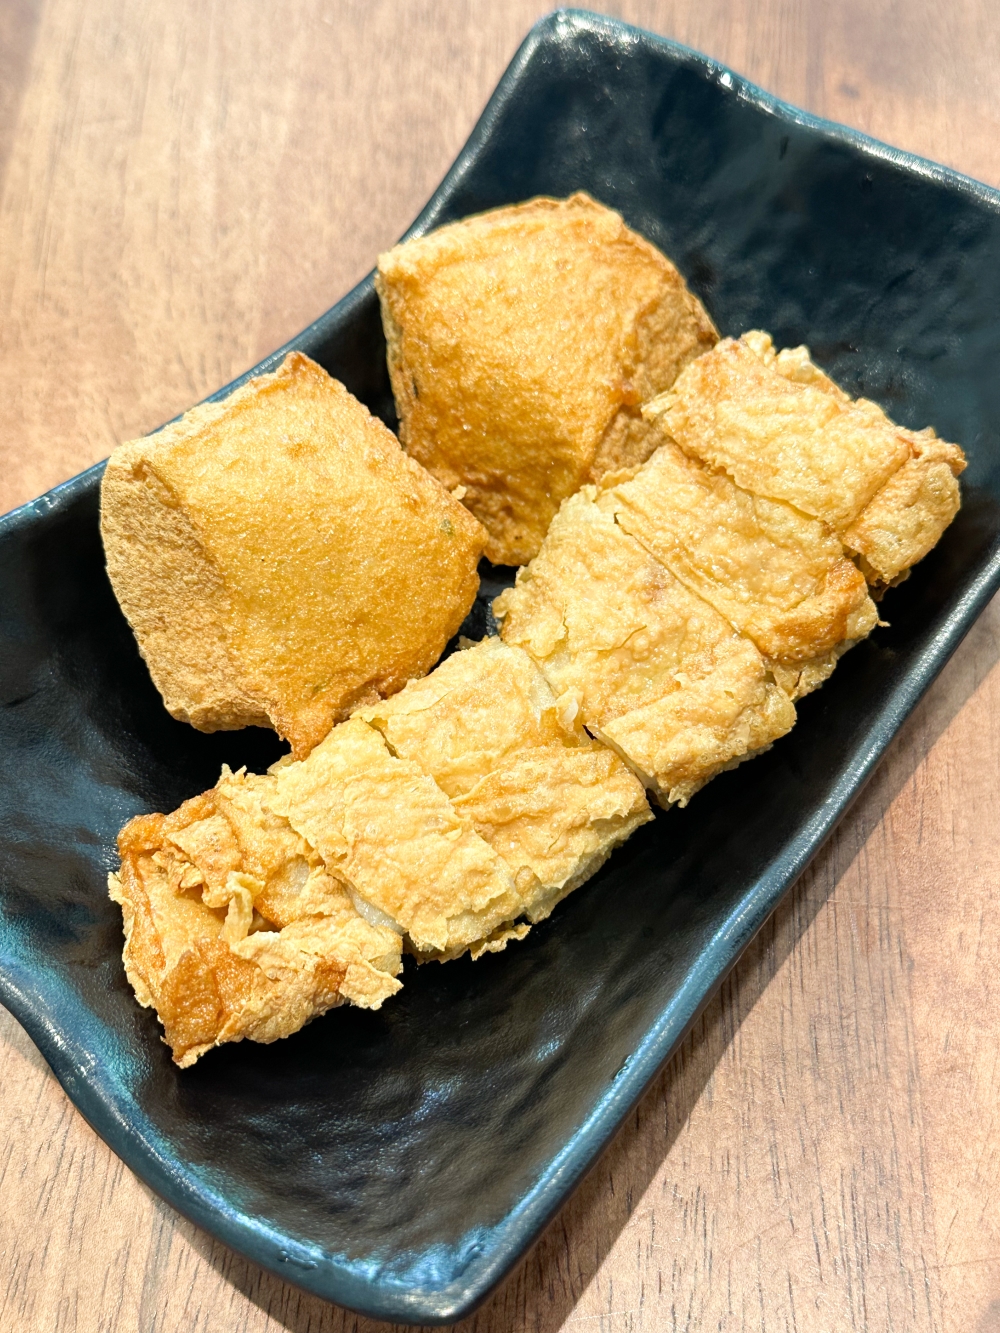 Fried Fish Tofu and Fried Beancurd is crispy without any oily residue.